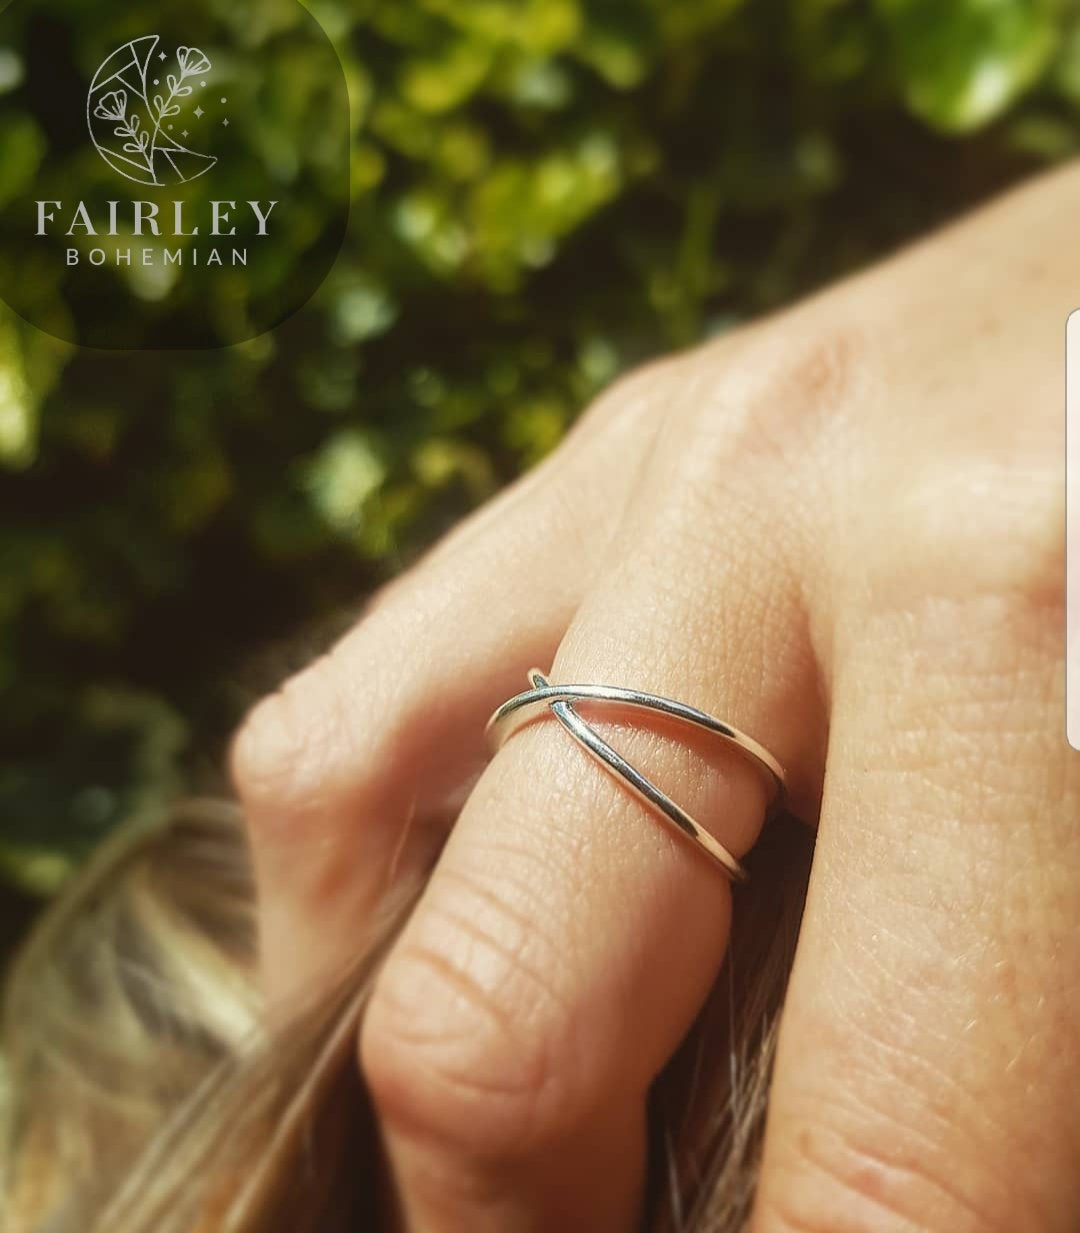 Solid Silver Adjustable Ring Stylish Minimalist Check out our full range of Boho Jewellery // Boho Jewelry // Hippie Jewellery // Hippie Jewelry // Boho Chic Jewellery // Boho Chic Jewelry hand model